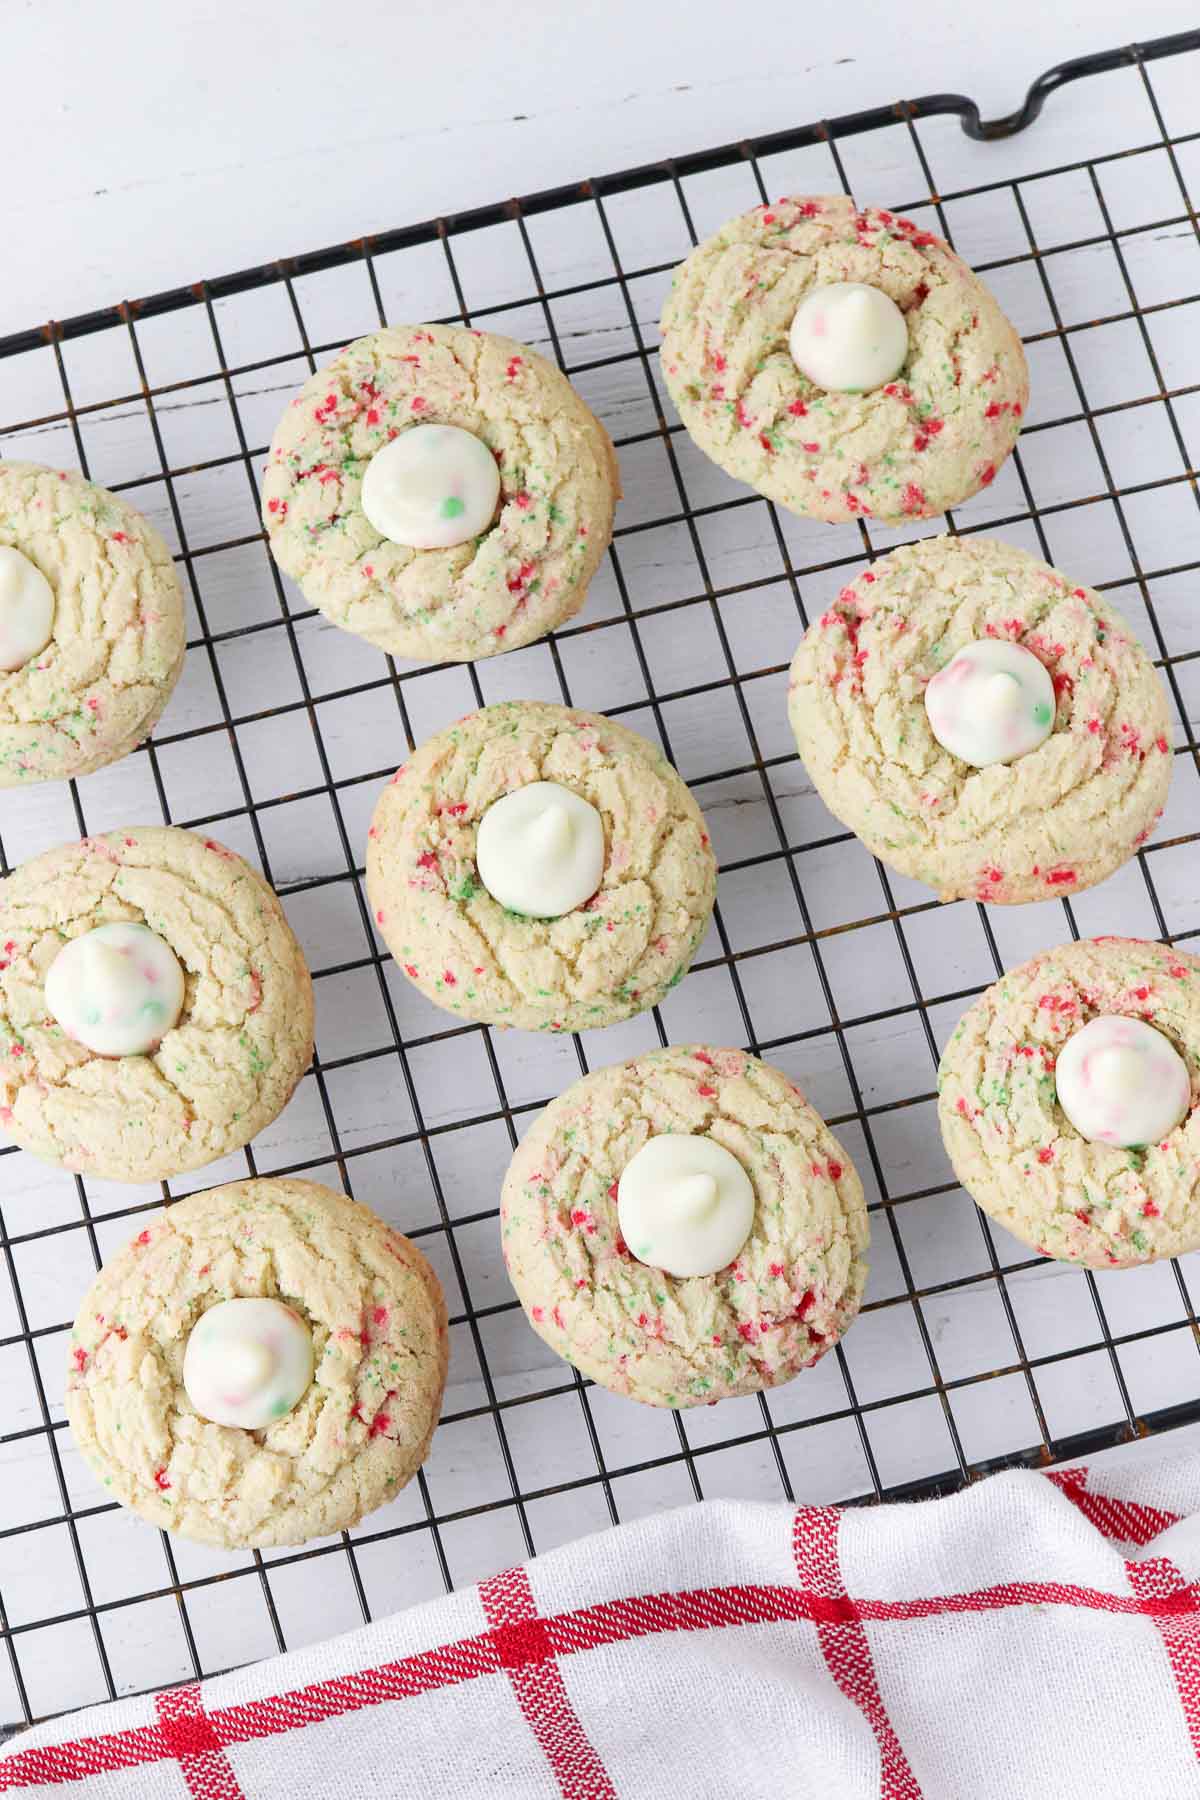 nine sugar cookie blossom cookies baked with red and green sugar sprinkles and a white chocolate Hershey kiss in the center.